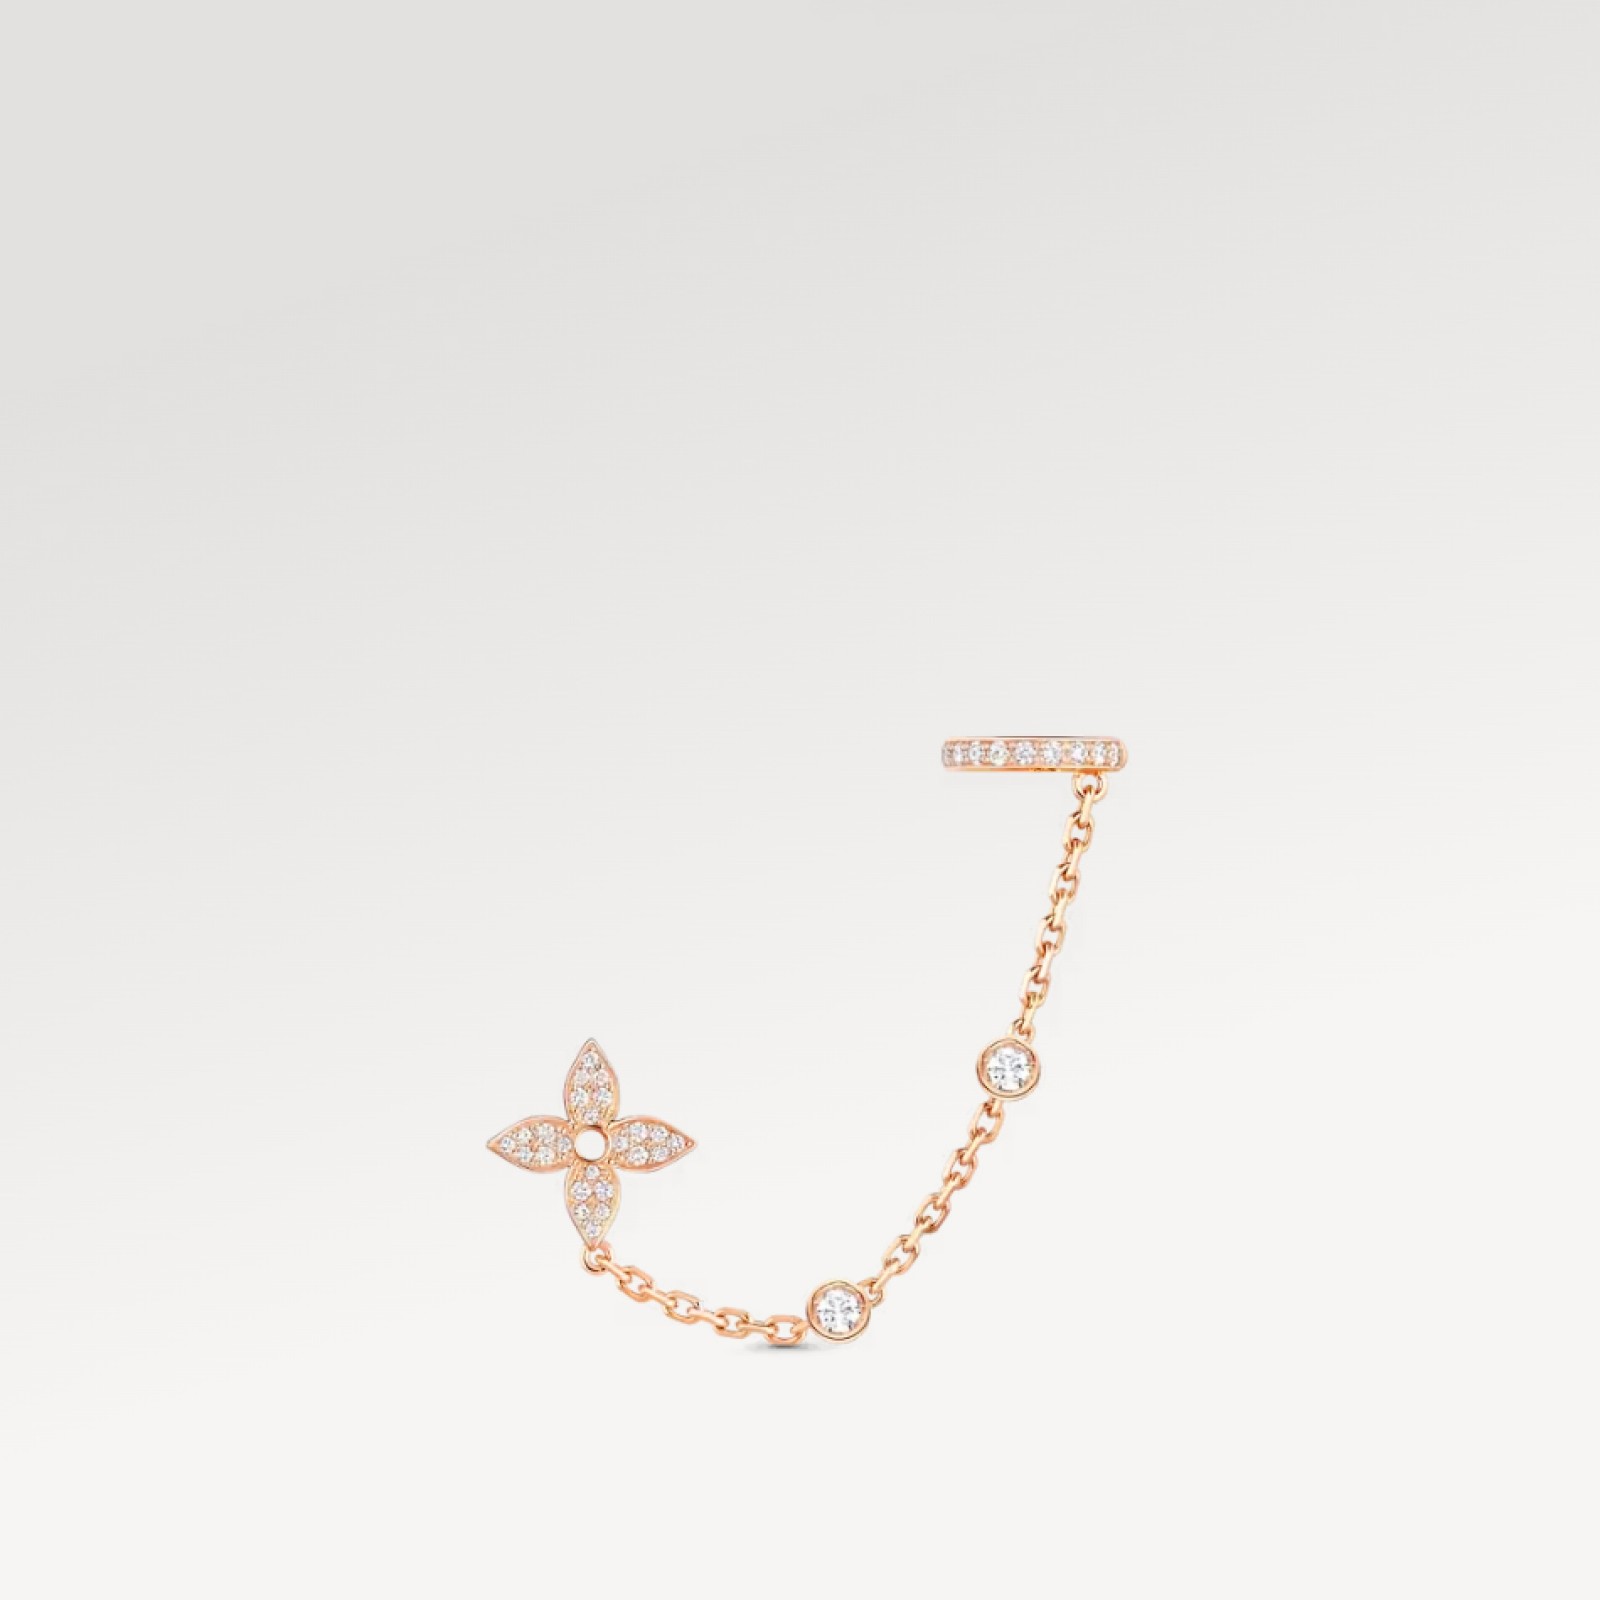 Idylle Blossom Mono Chain Earrings, Pink Gold And Diamonds - Per Unit